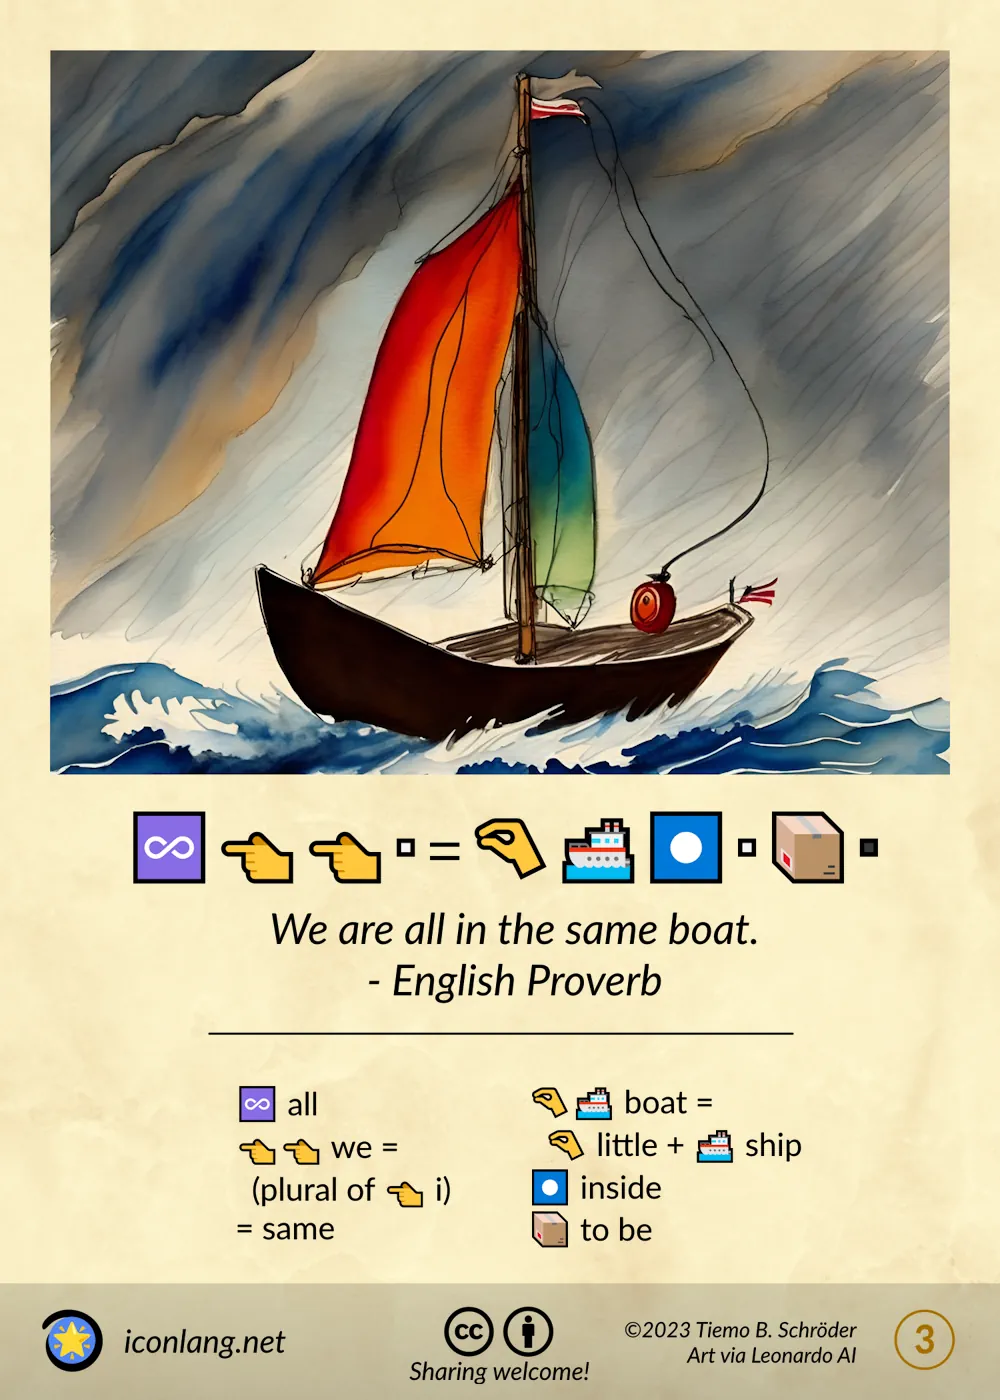 Card: We are all in the same boat. - English Proverb